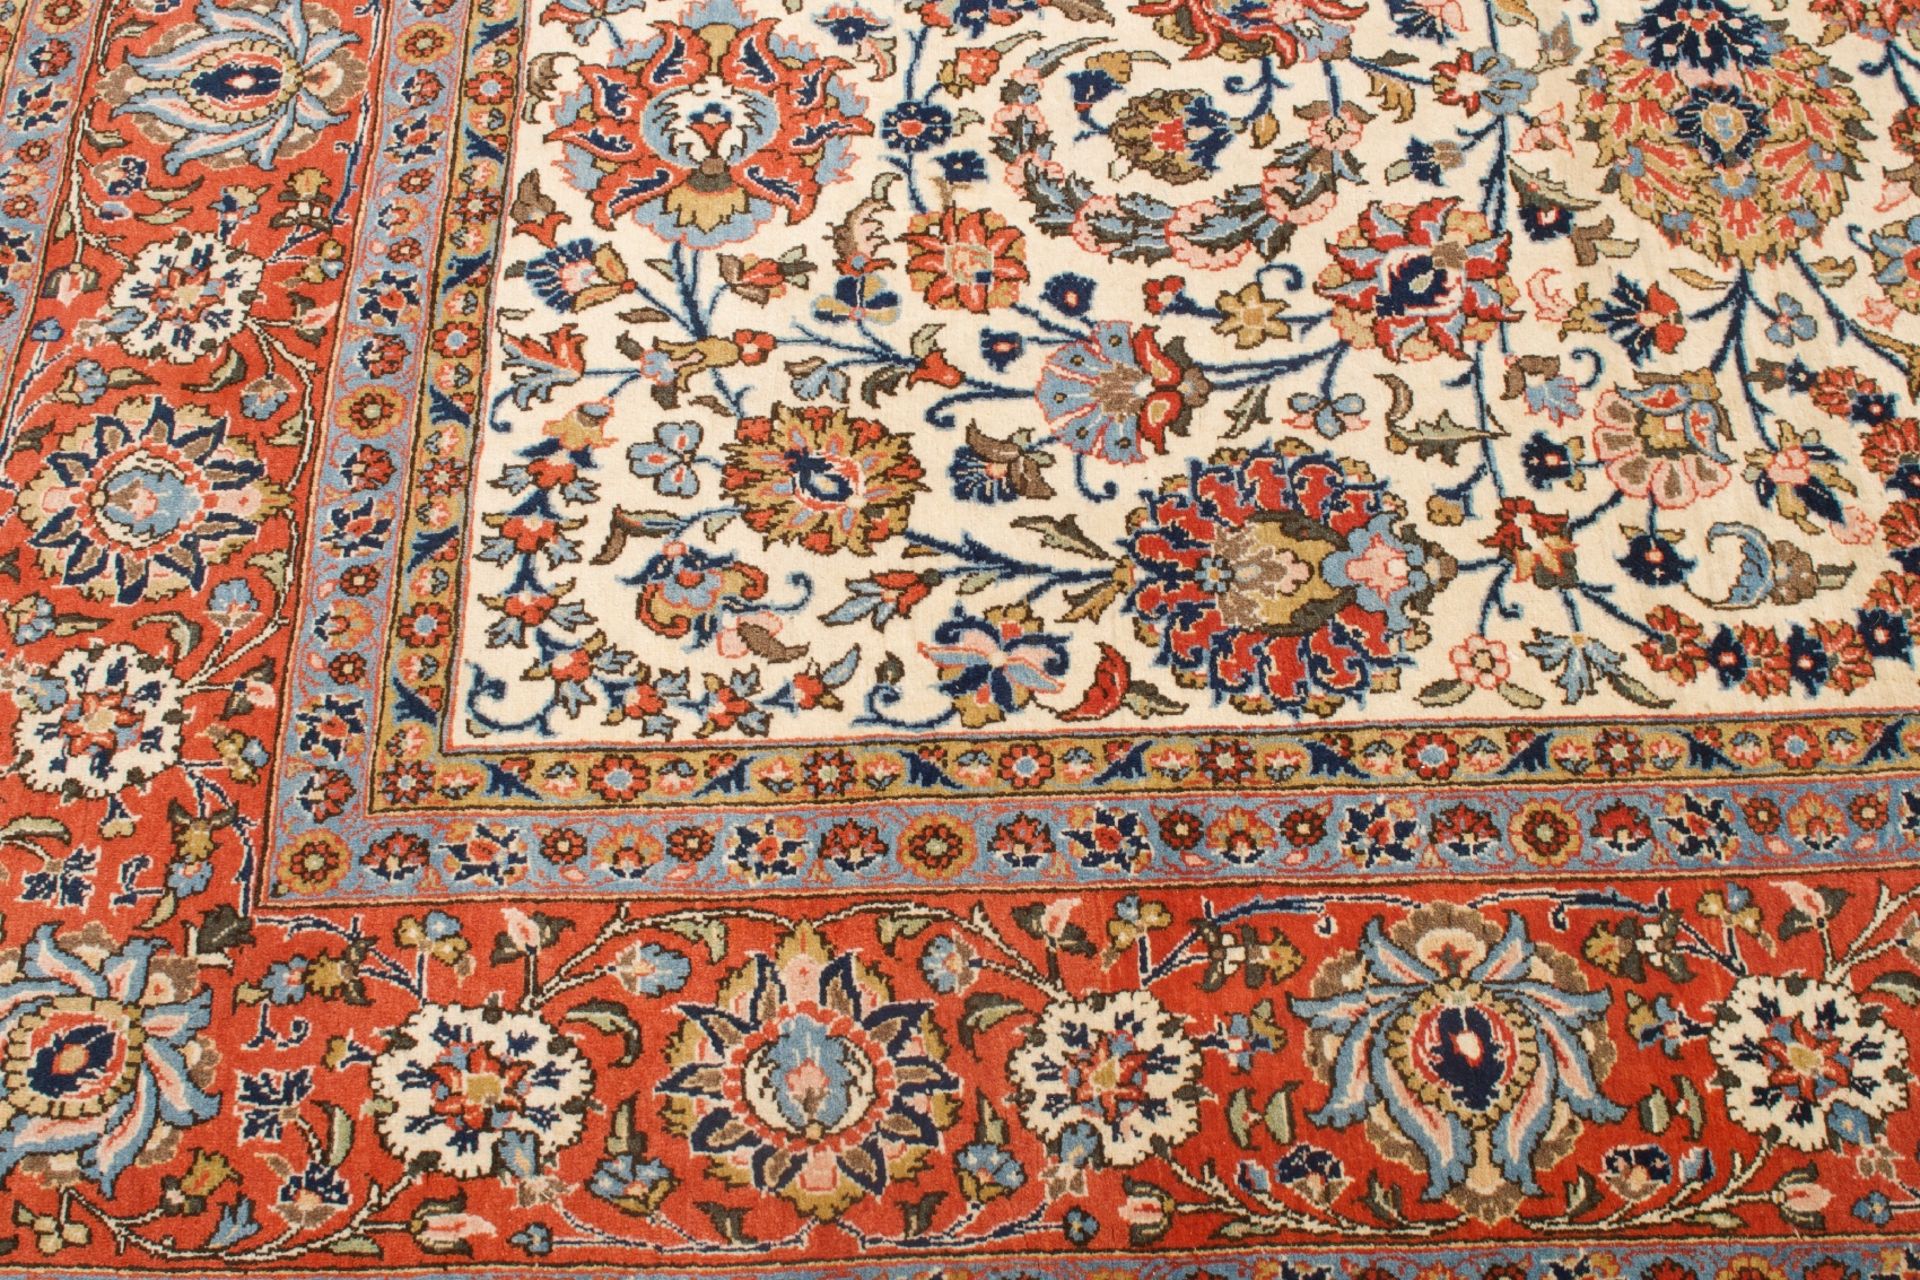 Grosser Isfahan Woll-Teppich | Large Isfahan wool carpet - Image 3 of 5